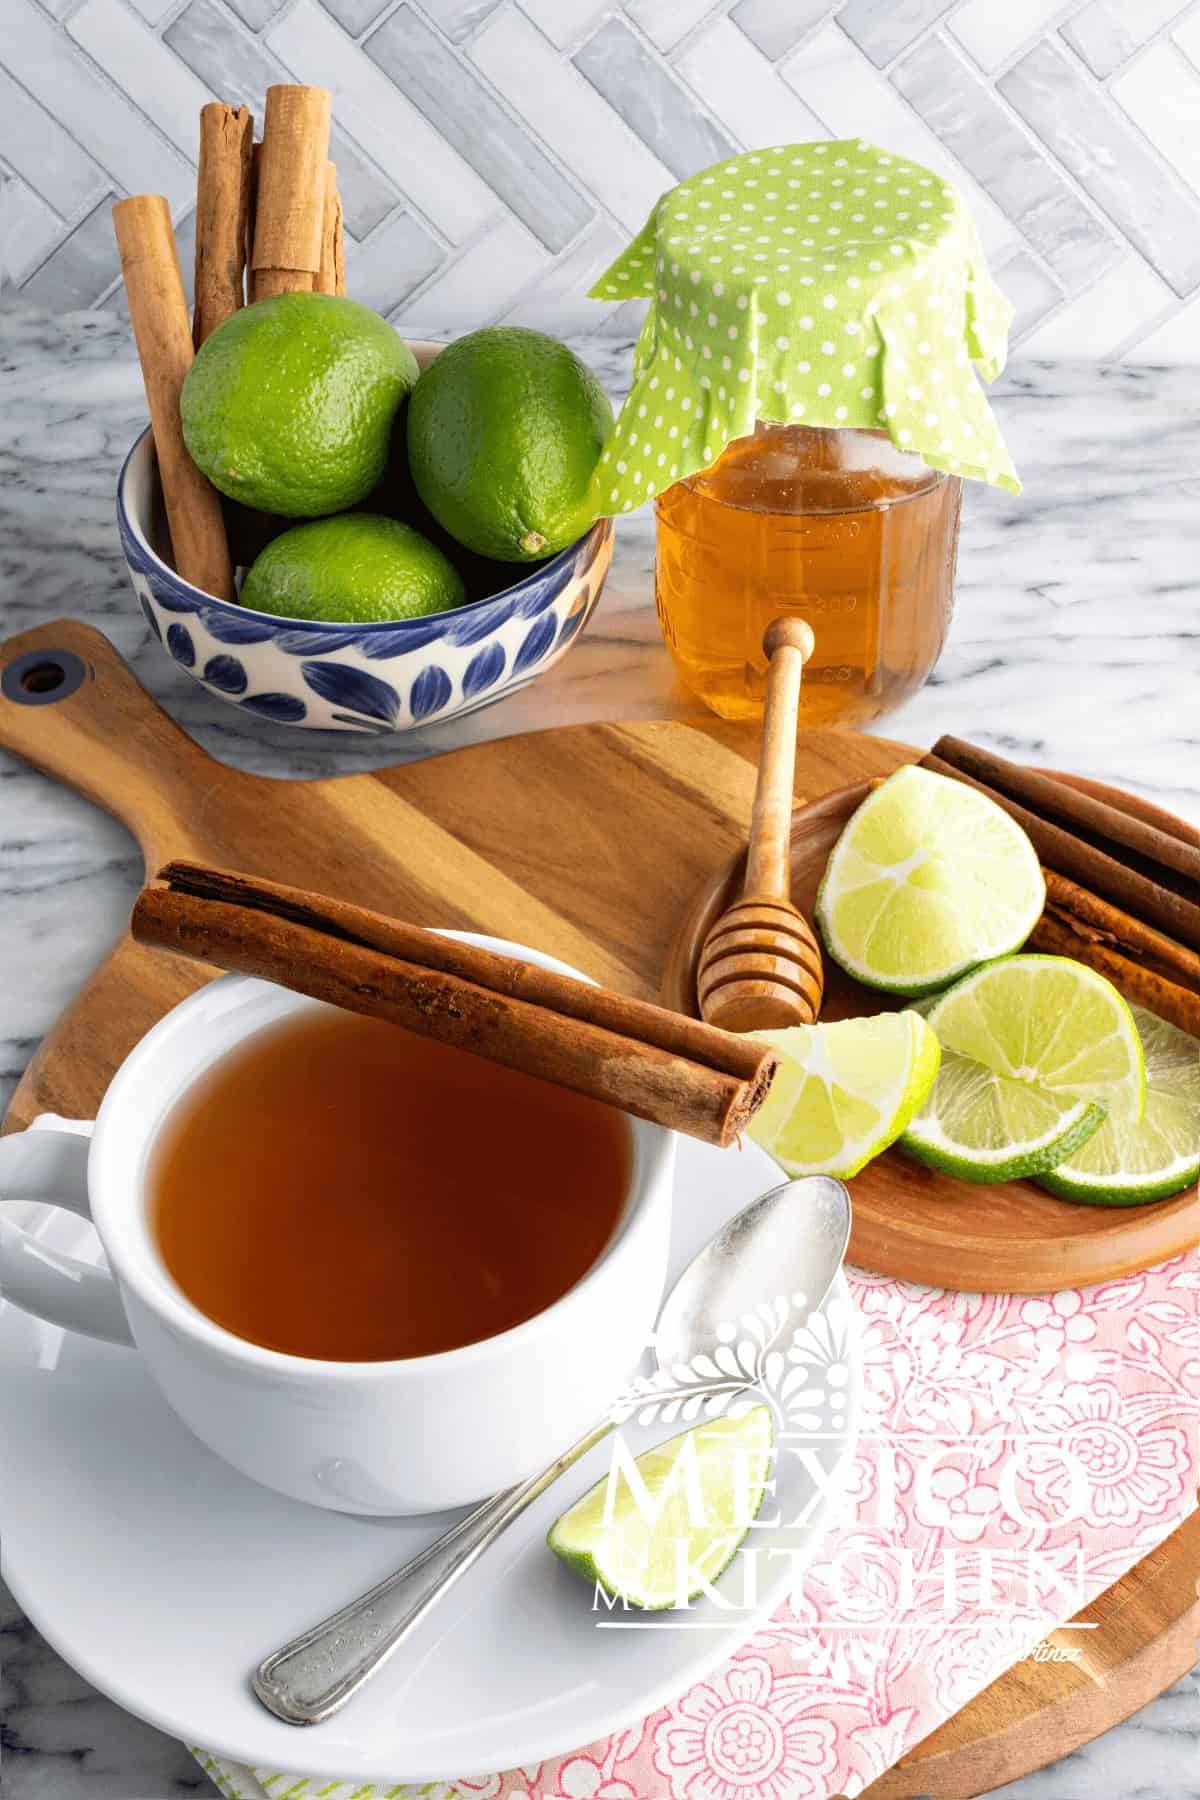 Cinnamon honey tea served in a white cup, next to lime wedges and cinnamon sticks.